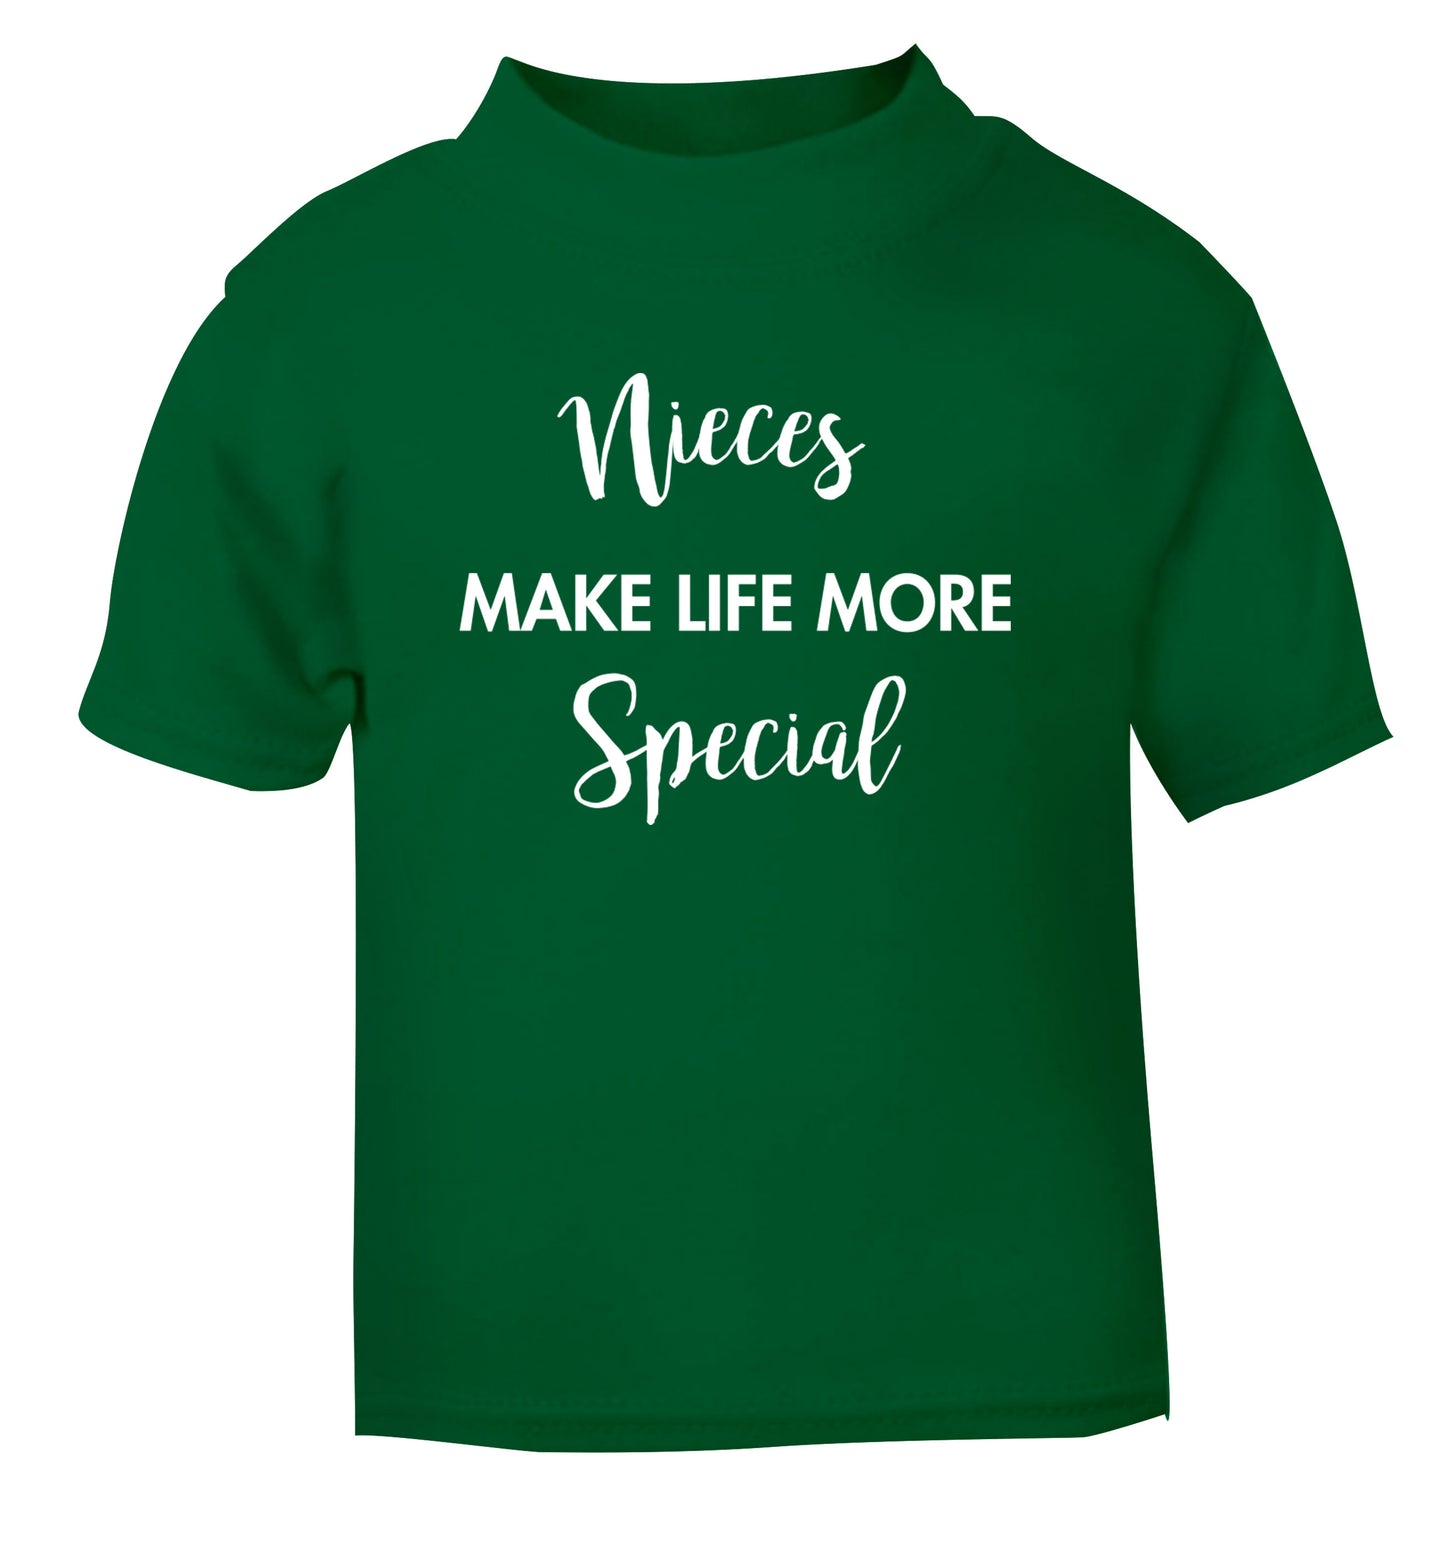 Nieces make life more special green Baby Toddler Tshirt 2 Years